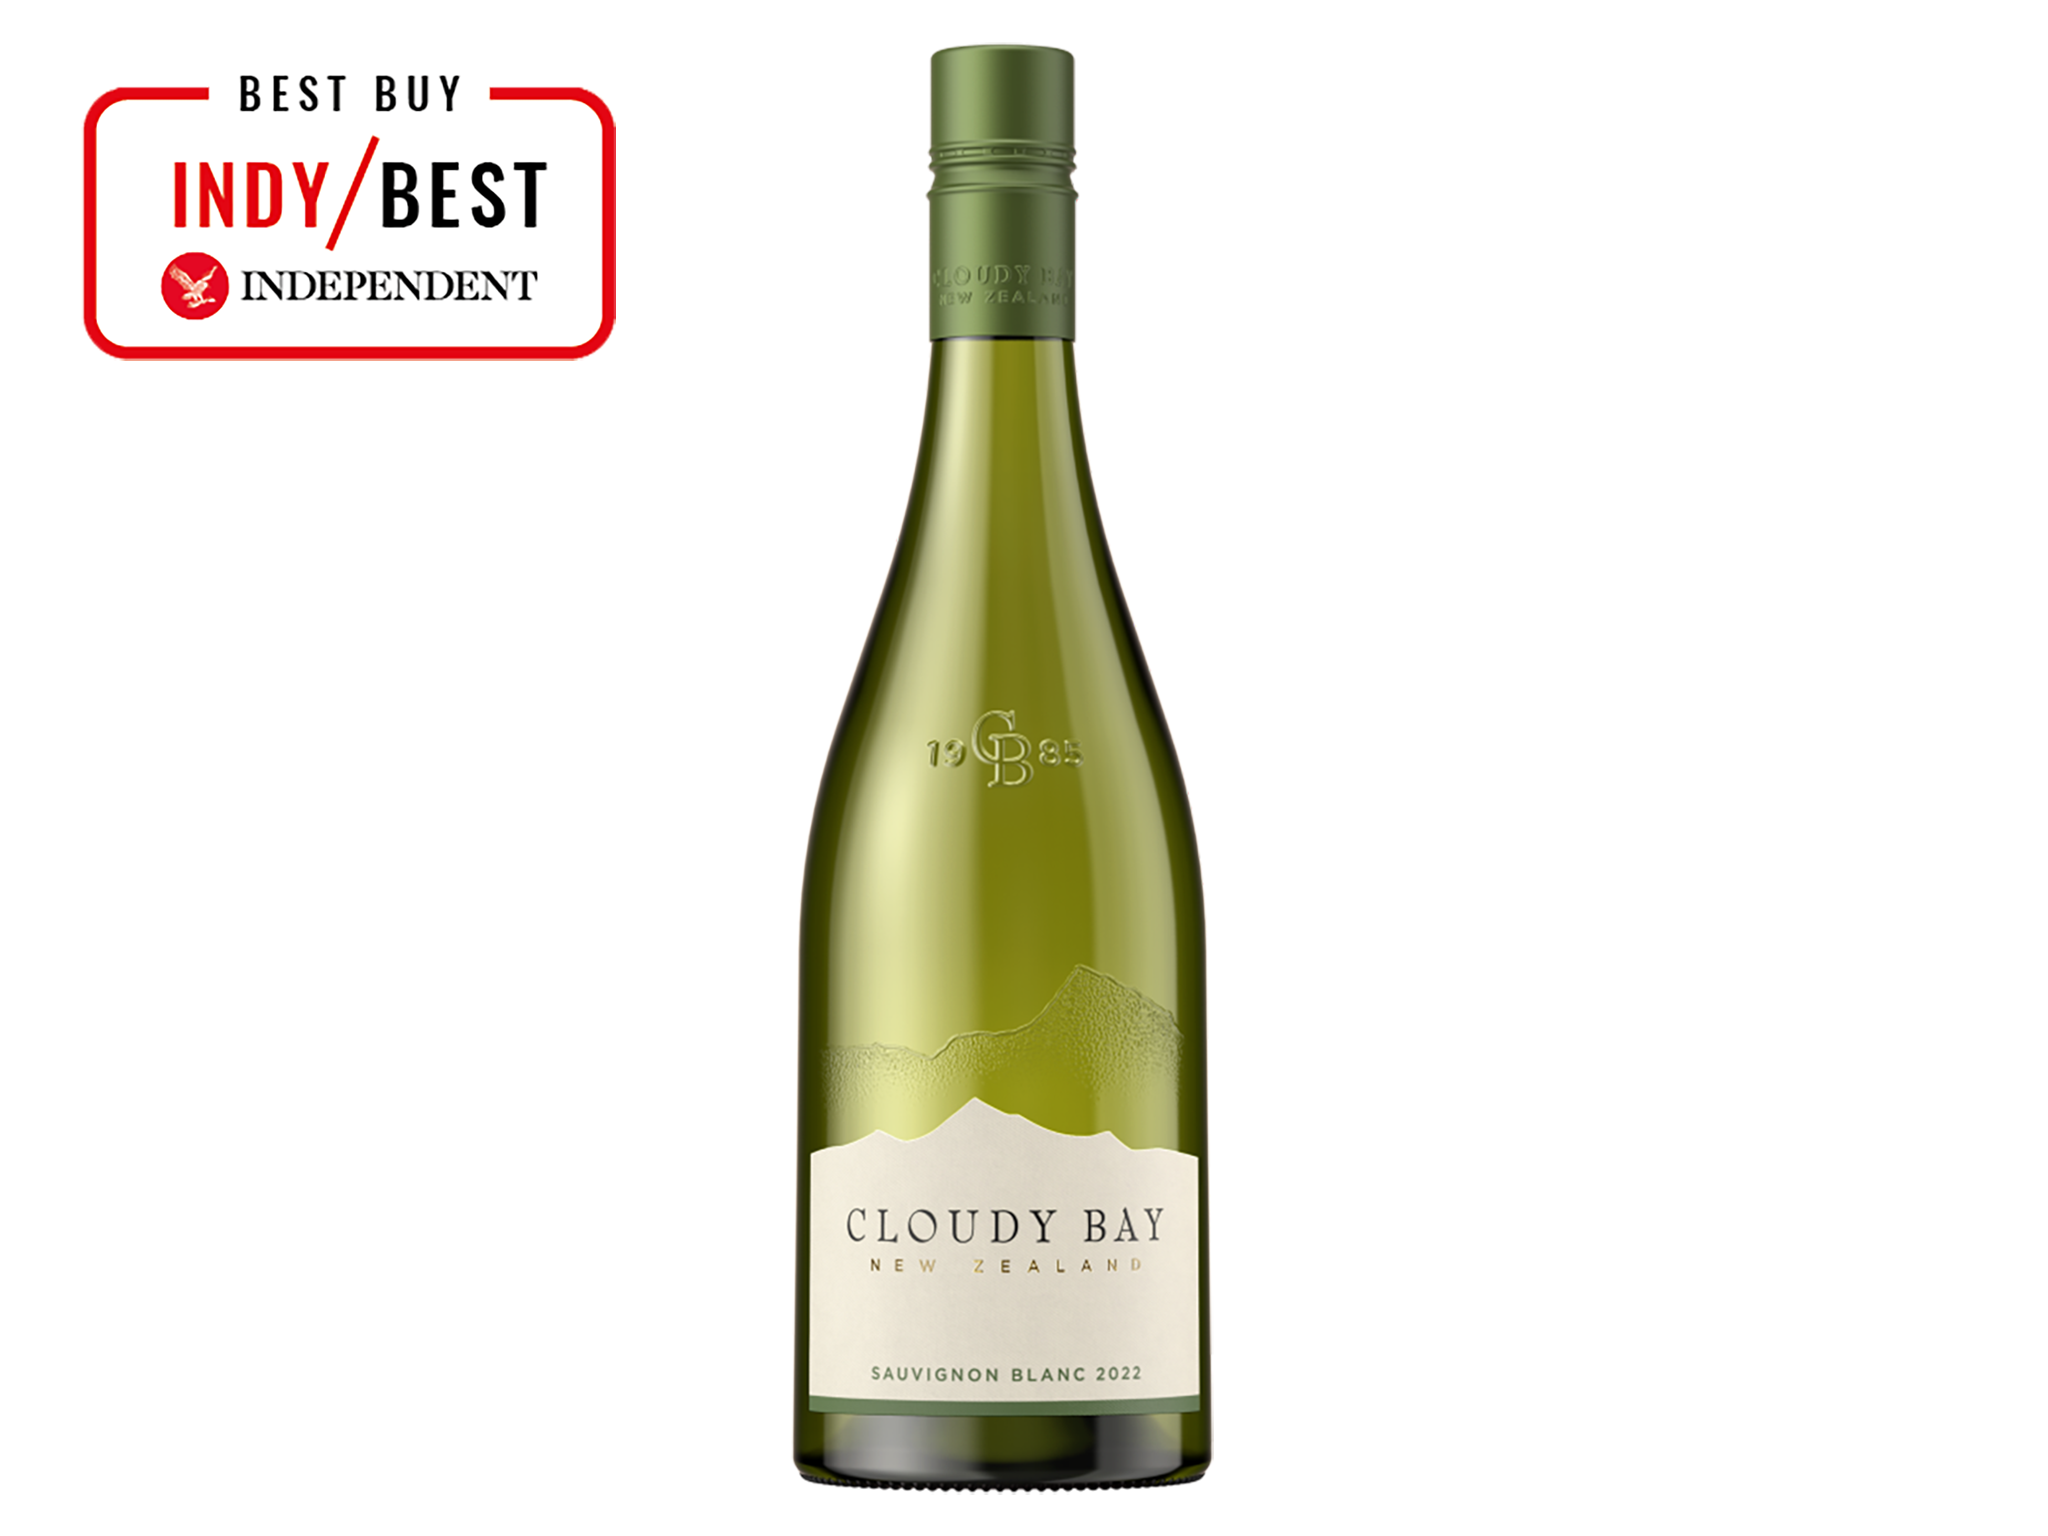 Cloudy Bay 2019 Sauvignon Blanc Value Wine Review (Wine Standards Series) 